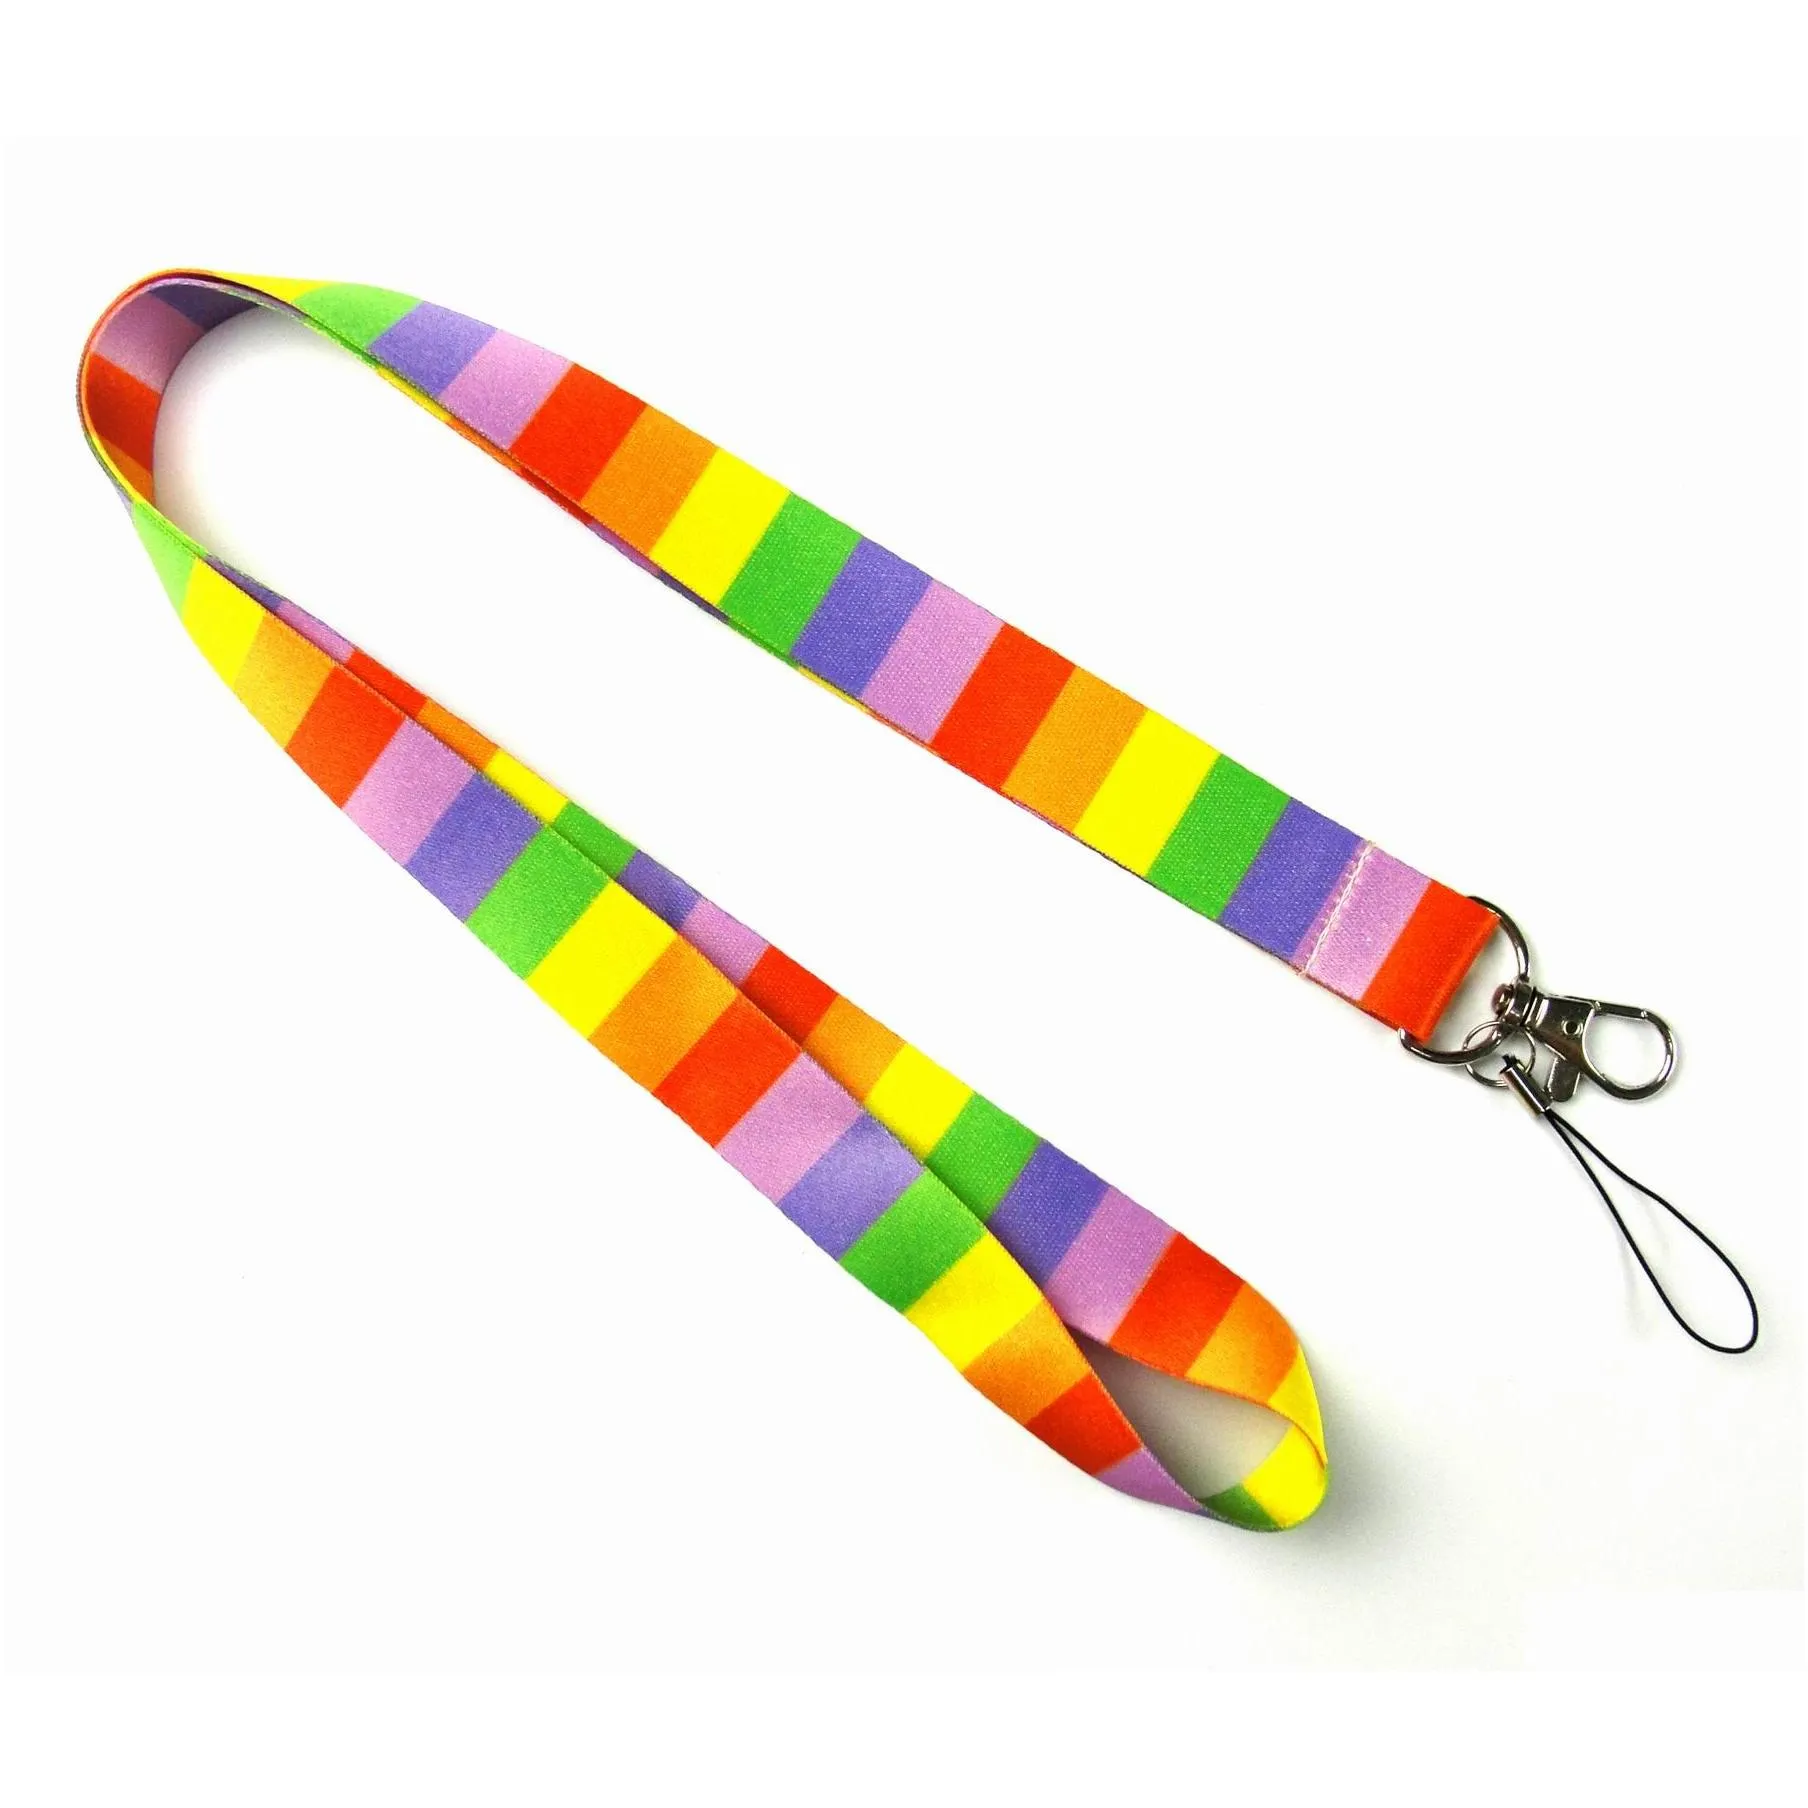 Wholesale Cell Phone Straps & Charms 20pcs Rainbow Color pattern Cartoon Mobile lanyard Key Chain ID card hang rope Sling Neck Badge Pendant